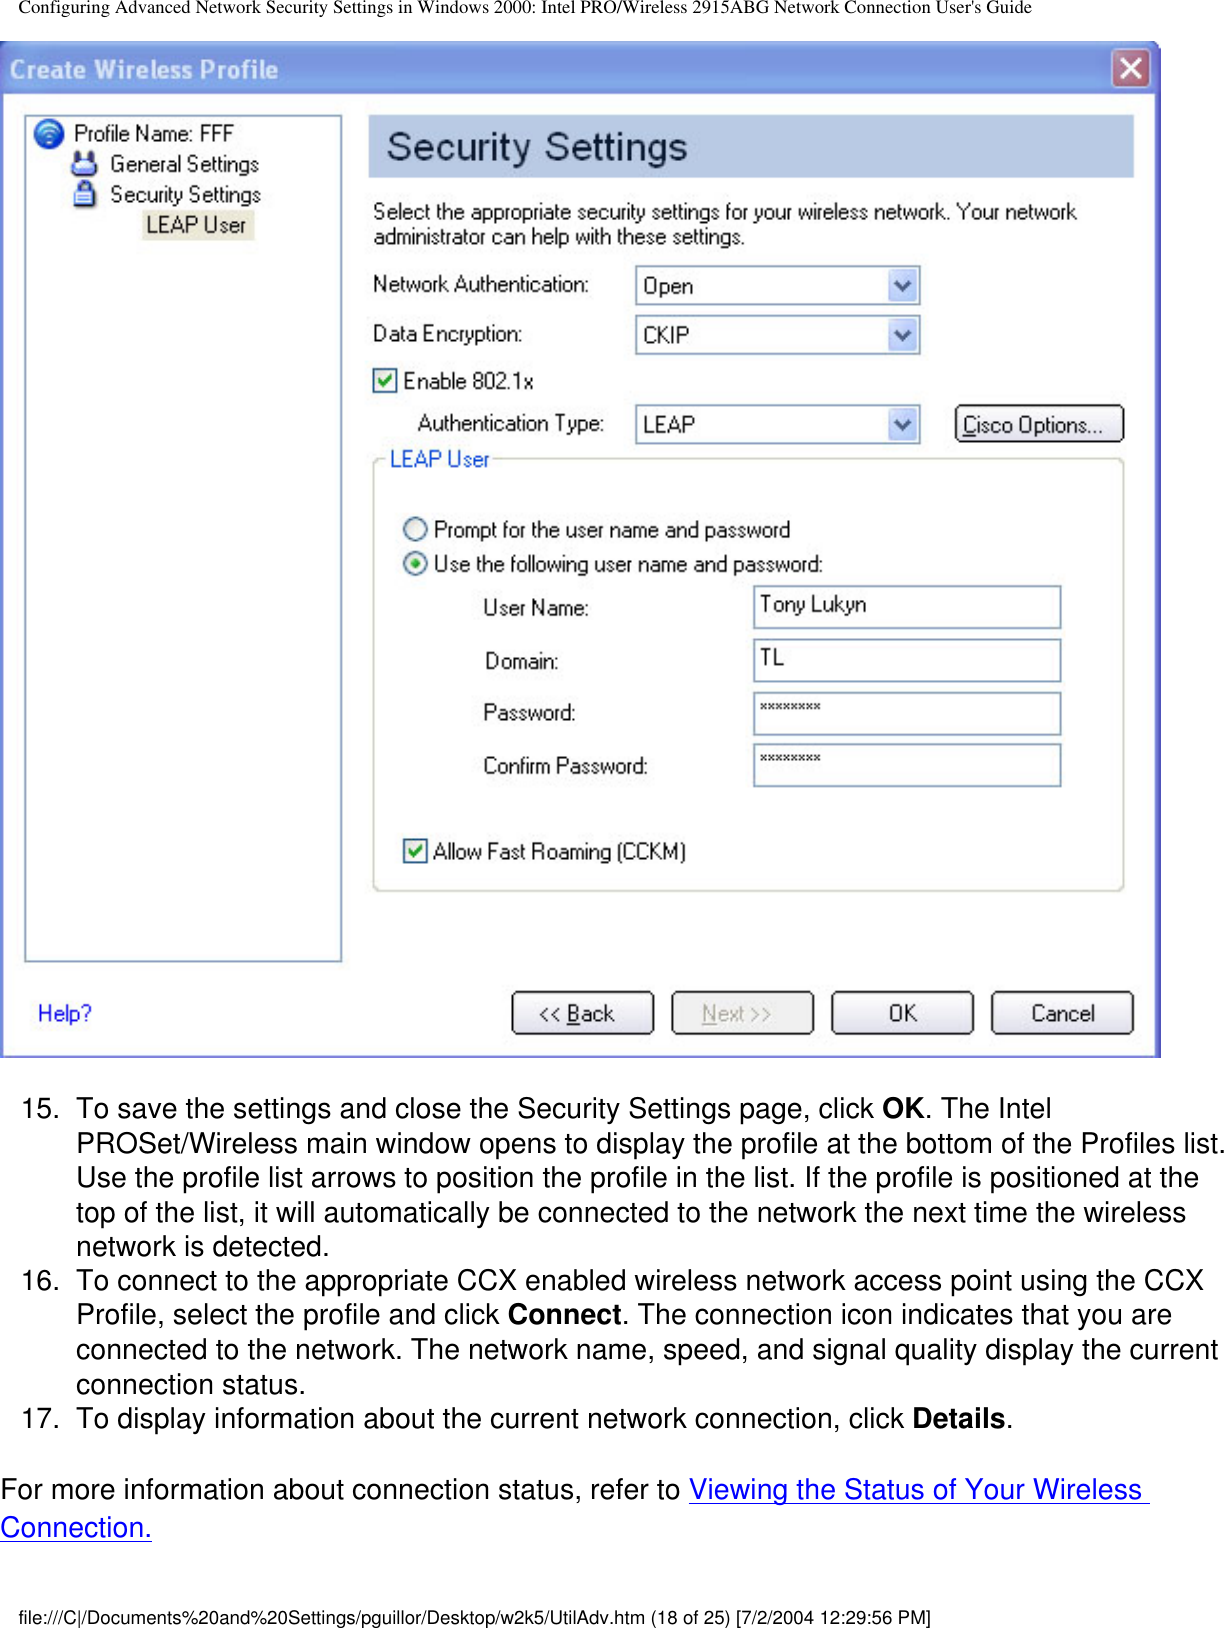 Configuring Advanced Network Security Settings in Windows 2000: Intel PRO/Wireless 2915ABG Network Connection User&apos;s Guide15.  To save the settings and close the Security Settings page, click OK. The Intel PROSet/Wireless main window opens to display the profile at the bottom of the Profiles list. Use the profile list arrows to position the profile in the list. If the profile is positioned at the top of the list, it will automatically be connected to the network the next time the wireless network is detected.16.  To connect to the appropriate CCX enabled wireless network access point using the CCX Profile, select the profile and click Connect. The connection icon indicates that you are connected to the network. The network name, speed, and signal quality display the current connection status. 17.  To display information about the current network connection, click Details.For more information about connection status, refer to Viewing the Status of Your Wireless Connection.file:///C|/Documents%20and%20Settings/pguillor/Desktop/w2k5/UtilAdv.htm (18 of 25) [7/2/2004 12:29:56 PM]